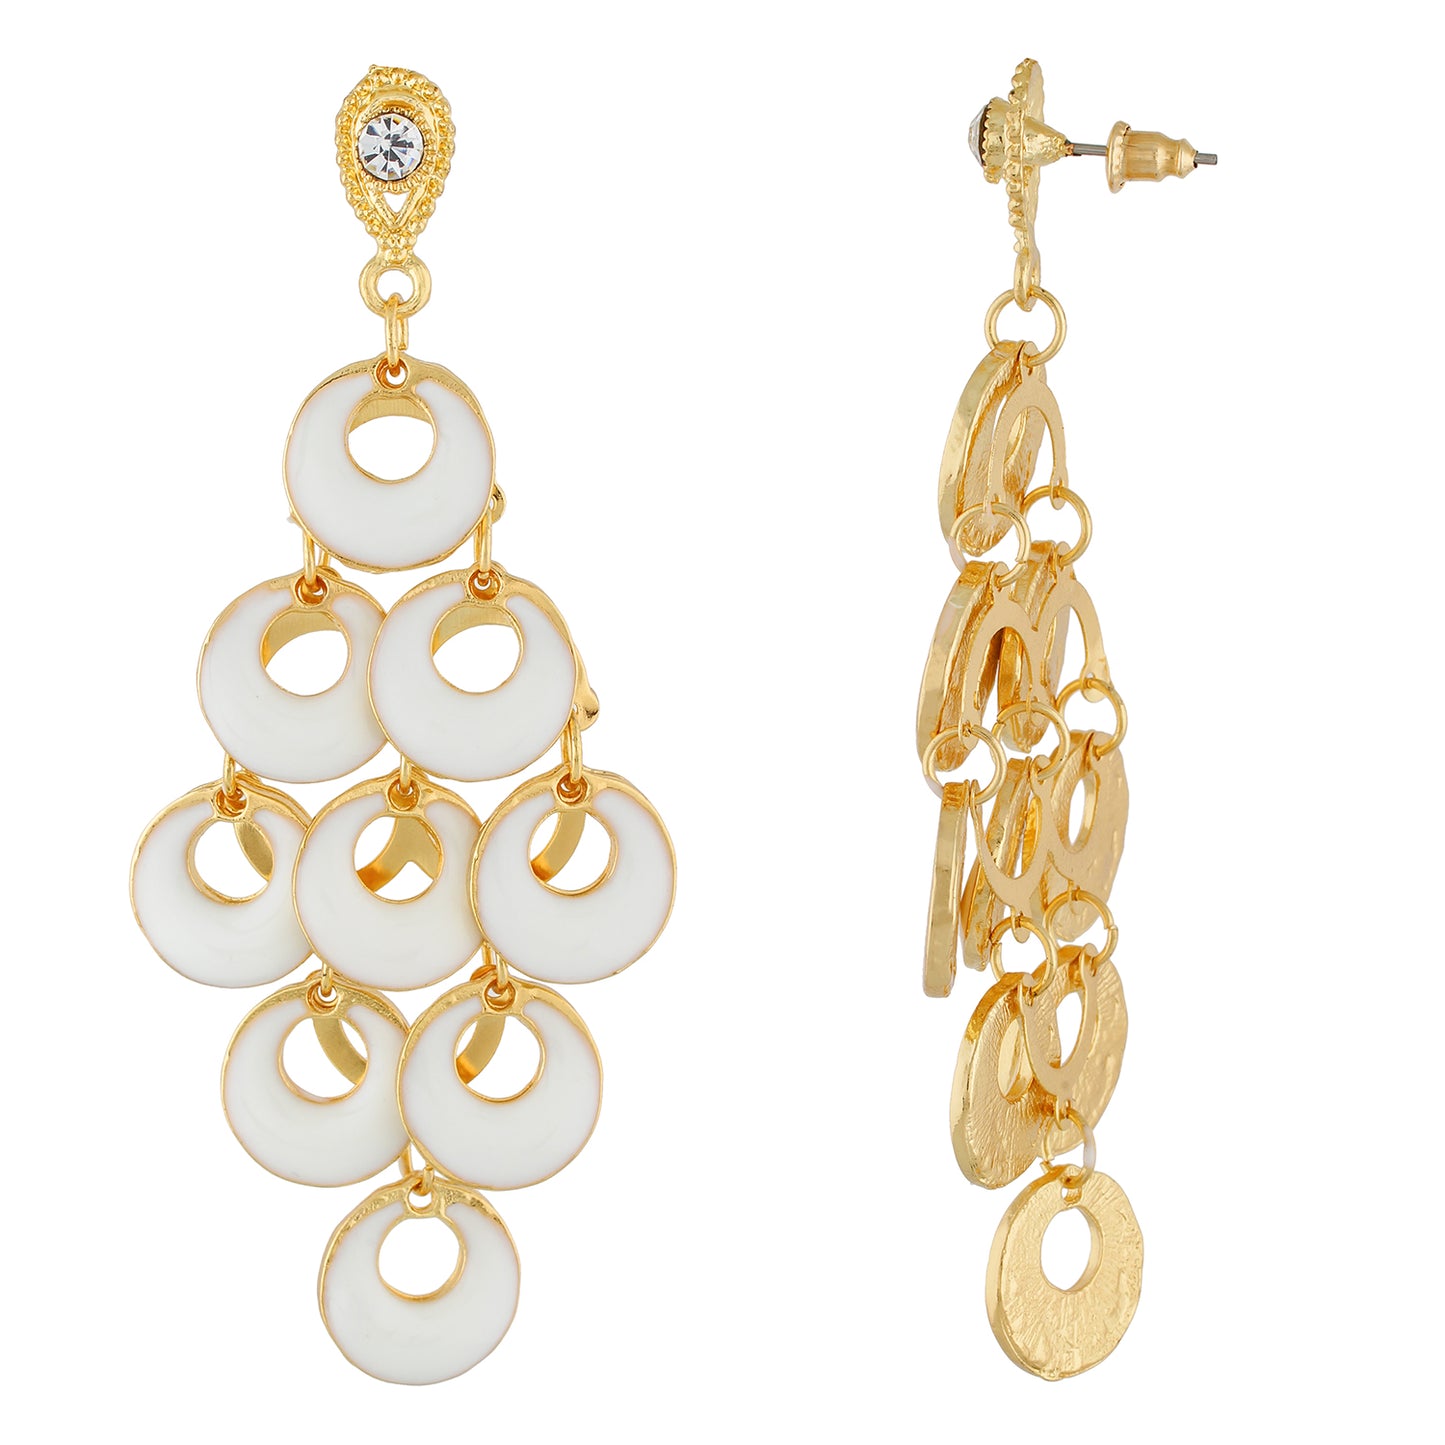 Dashing White and Gold Colour Bunch of Circles Design Earring for Girls and Women